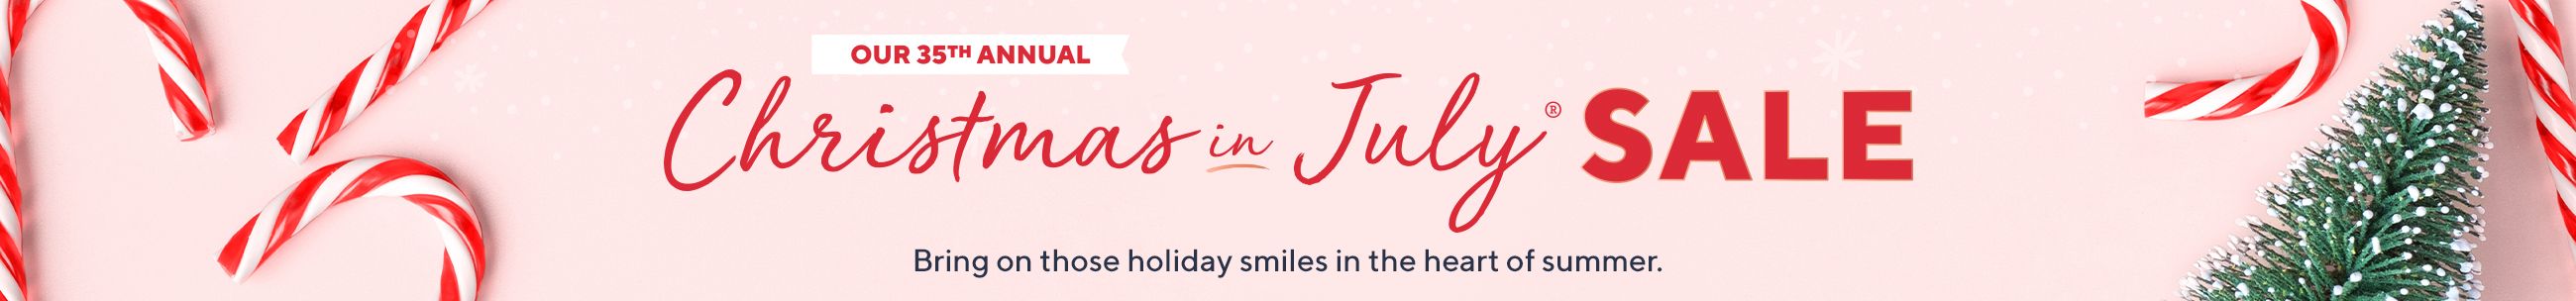 Our 35th Annual Christmas in July® Sale - Bring on those holiday smiles in the heart of summer. 